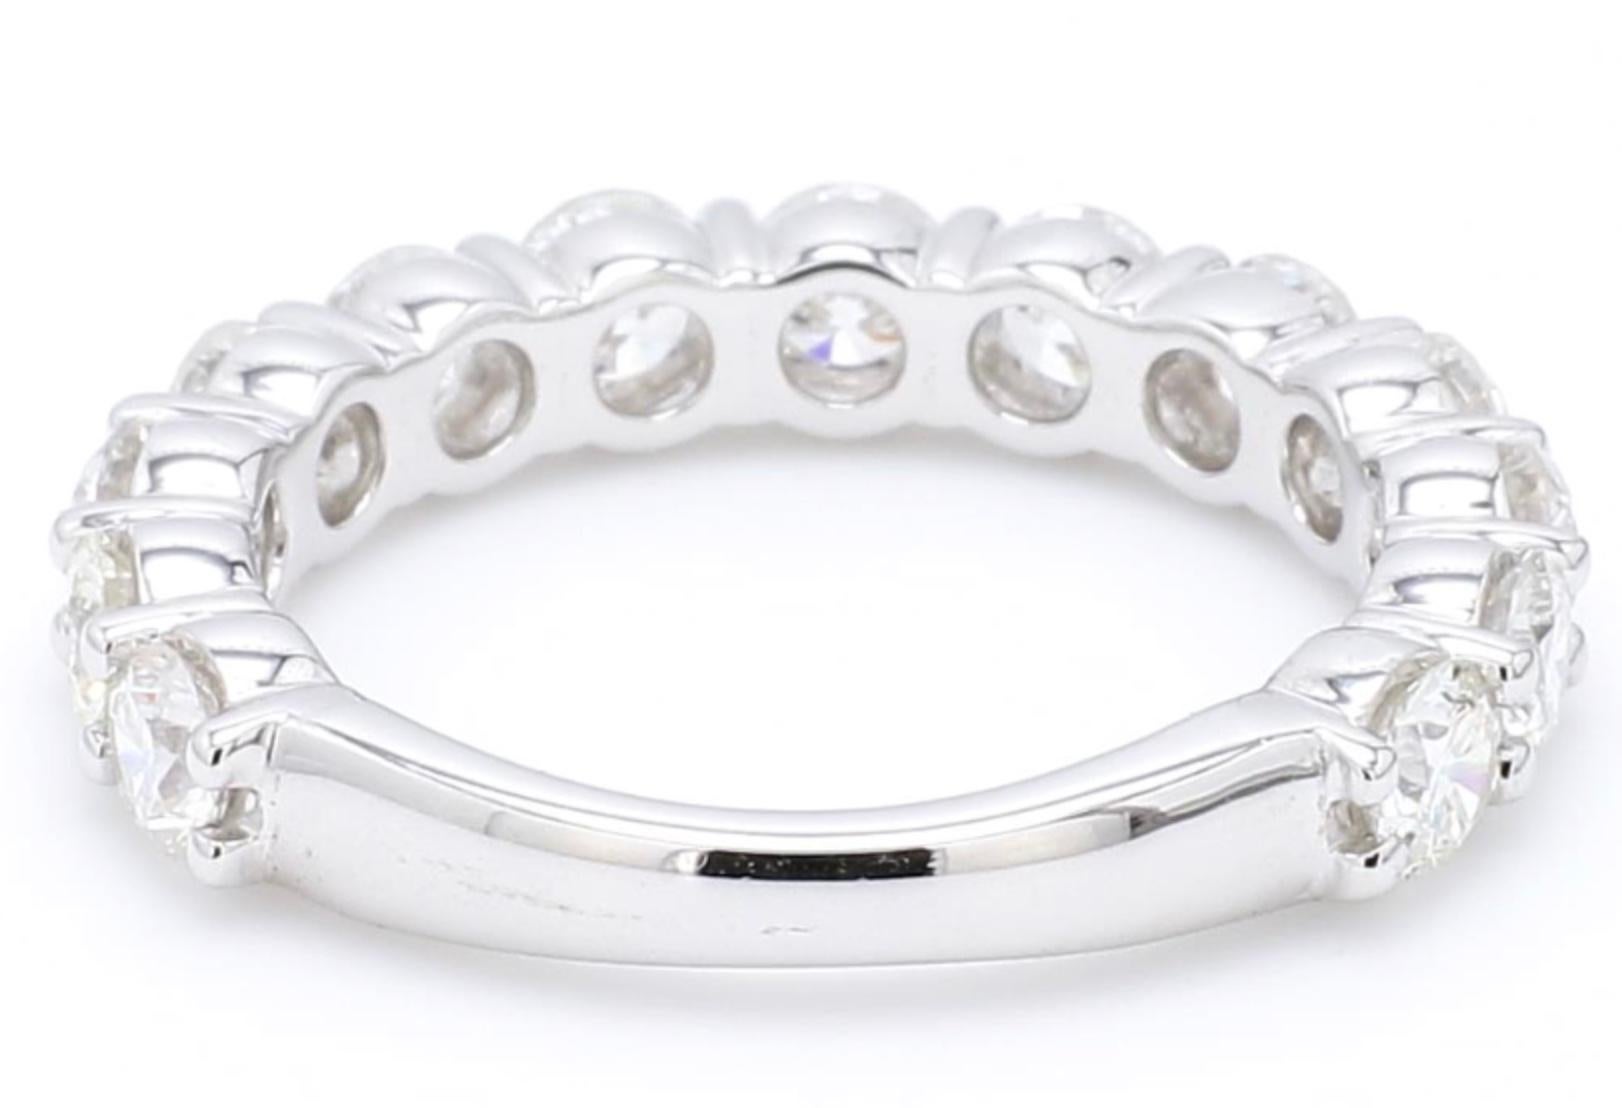 A Beautiful Handcrafted Eternity Wedding Ring in 18K White Gold with Natural Brilliant Round Brilliant Cut Diamond . A perfect Wedding Ring.  Each diamond is 3.50 mm size and  0.18 Carat Size

A continuous circle of Round diamonds gives this 2.25